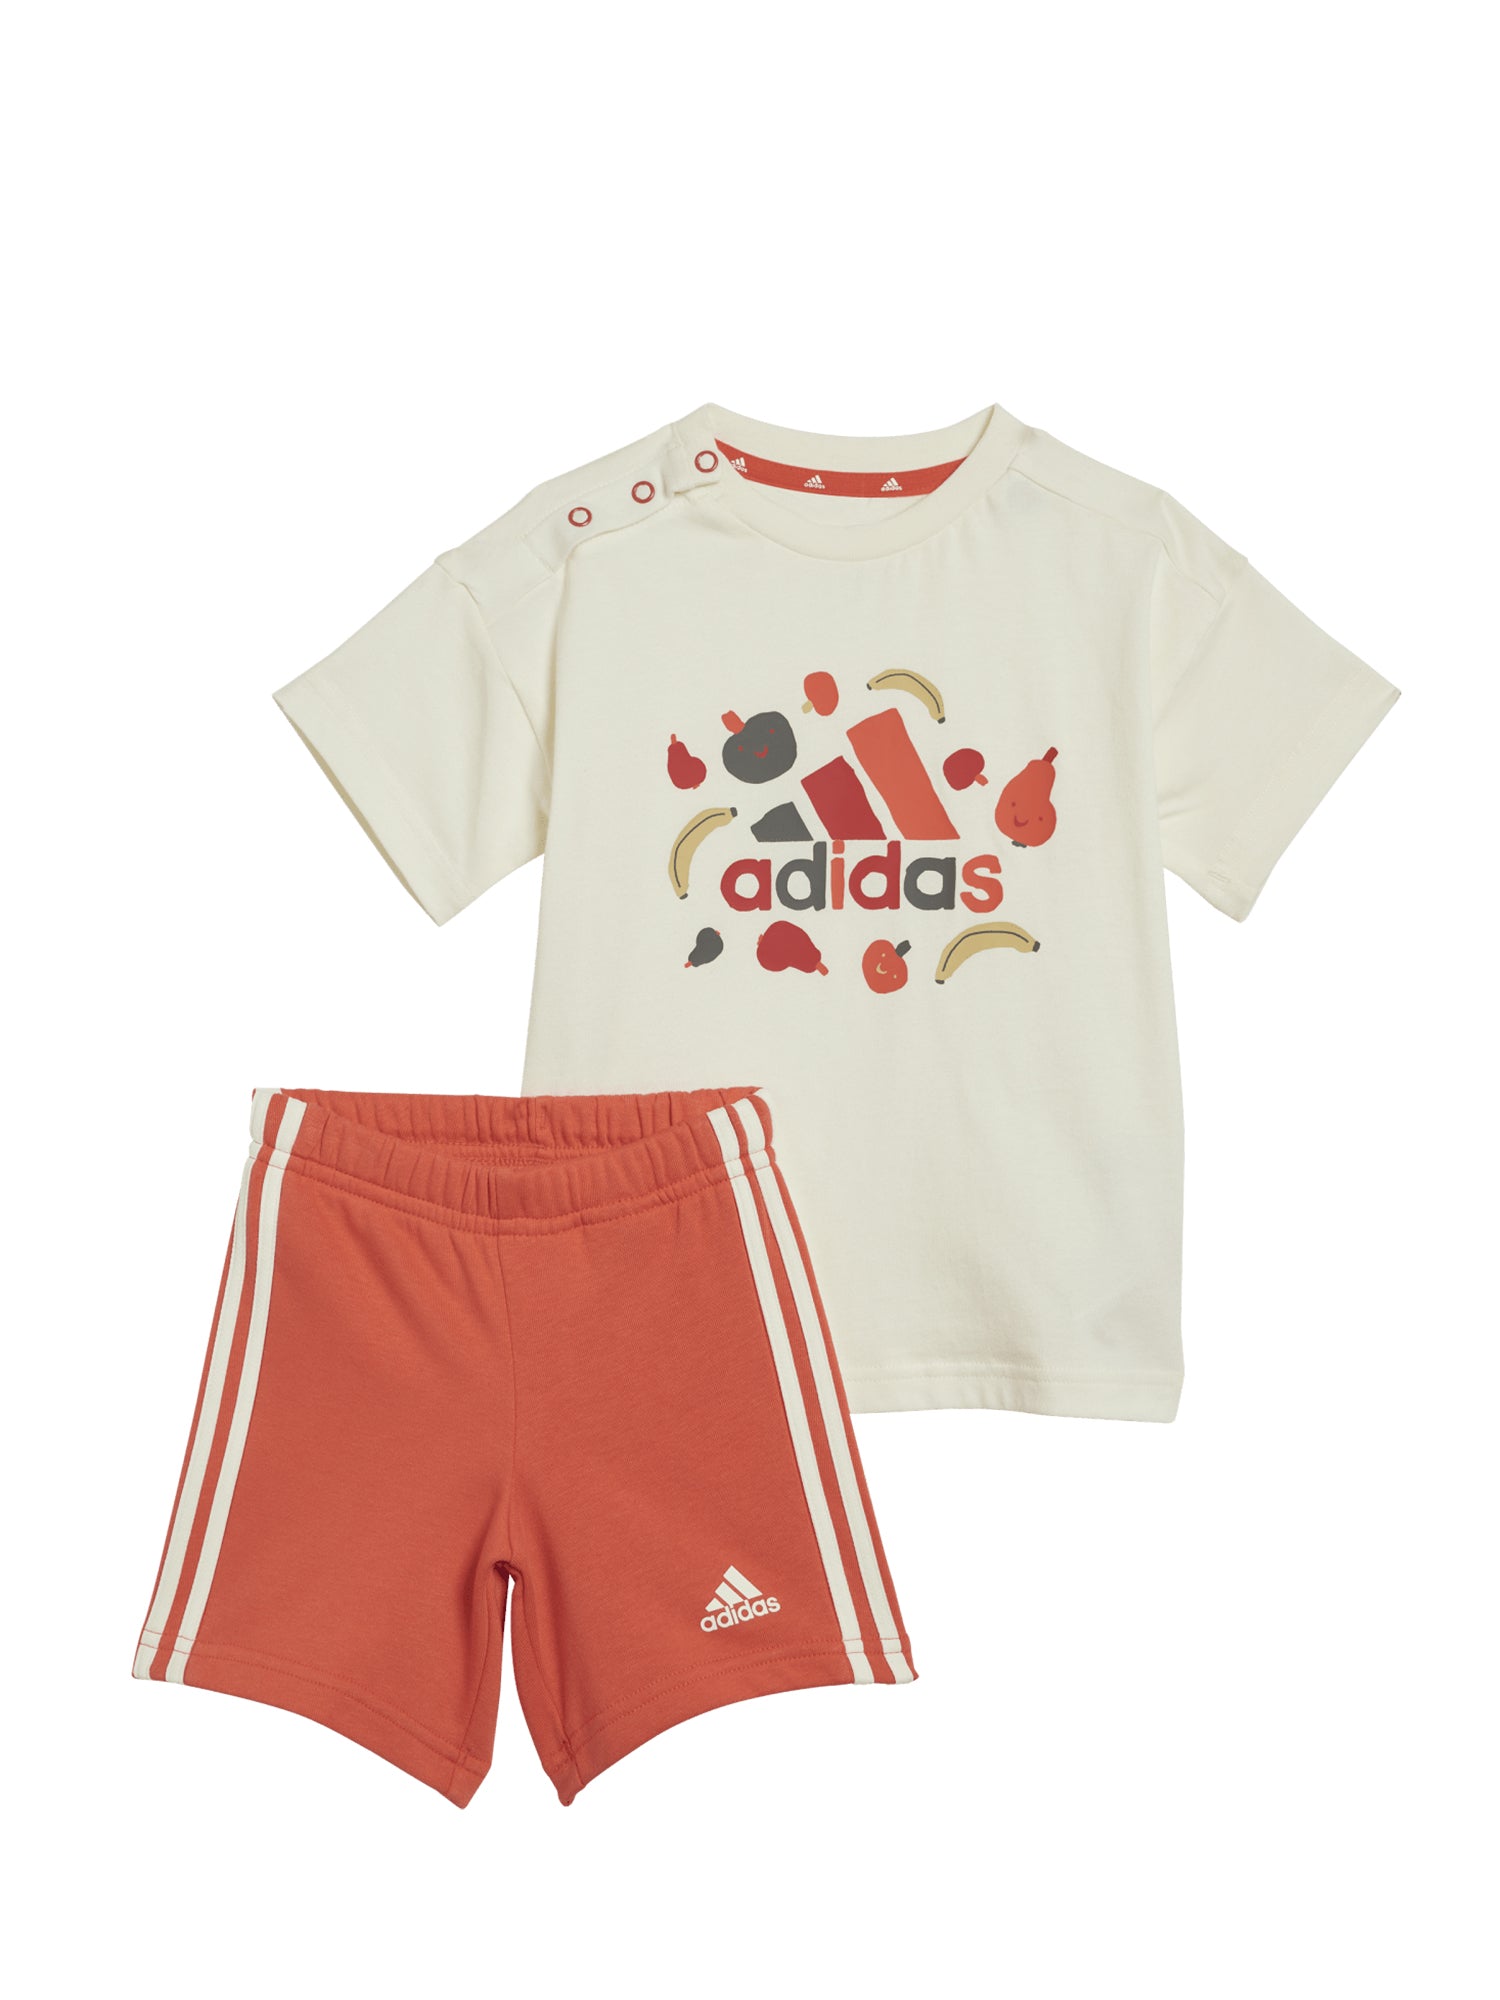 ADIDAS COMPLETINO ESSENTIALS ALLOVER PRINT TEE INFANT BEIGE - ROSSO